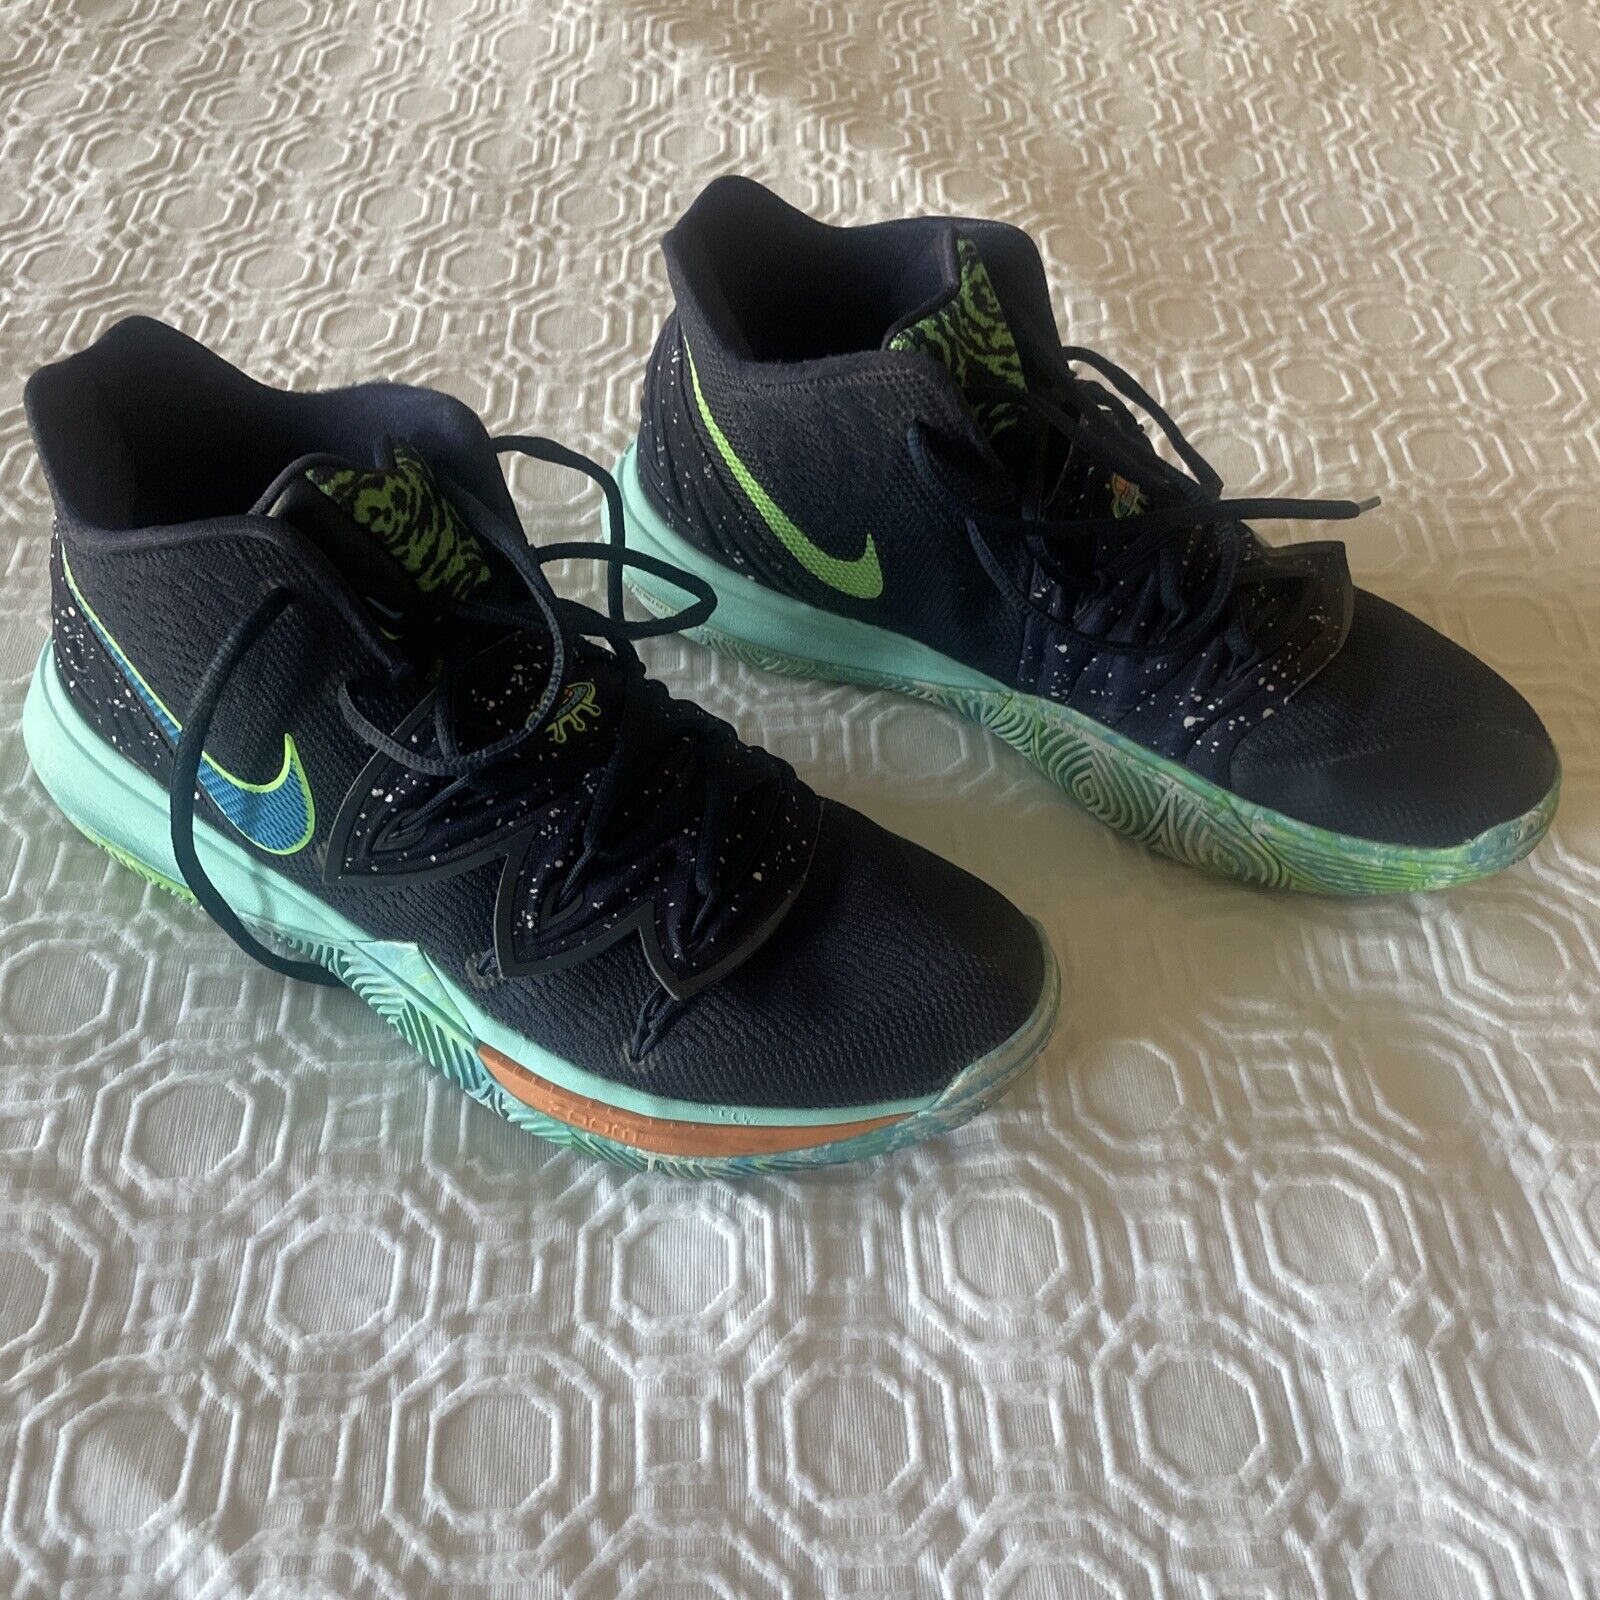 Lima dictador comestible Size 10.5 - Nike Kyrie 5 UFO 2019 for sale online | eBay